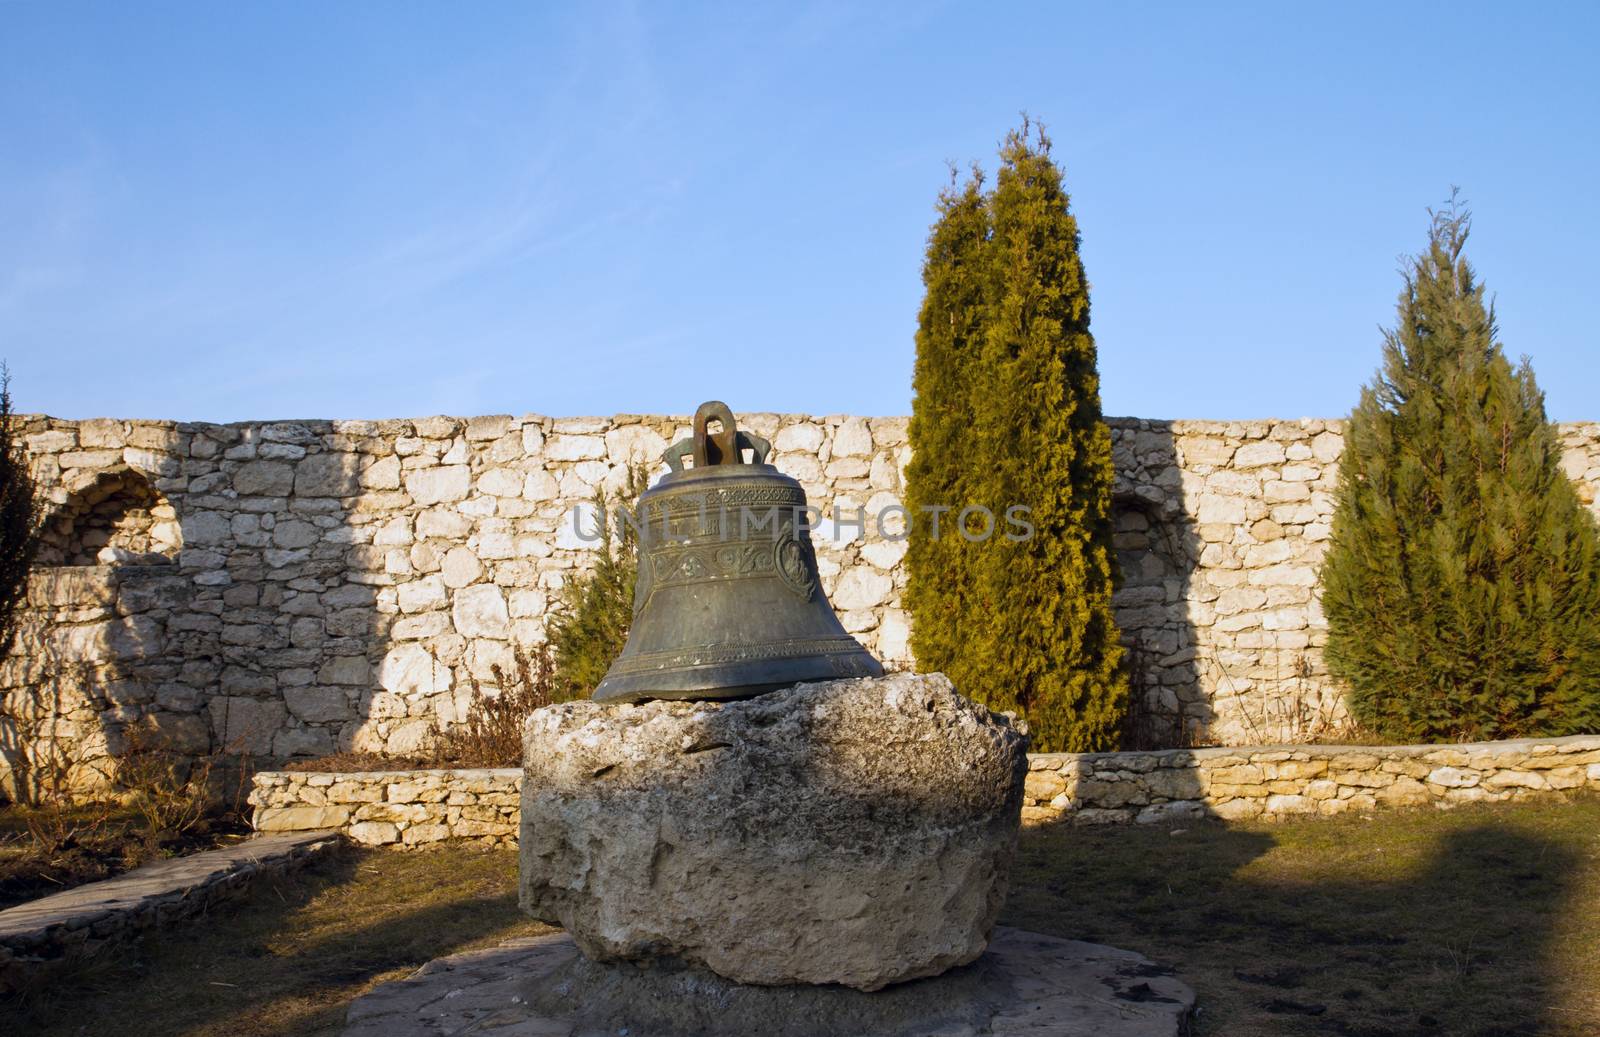 Huge old church bell on the stone